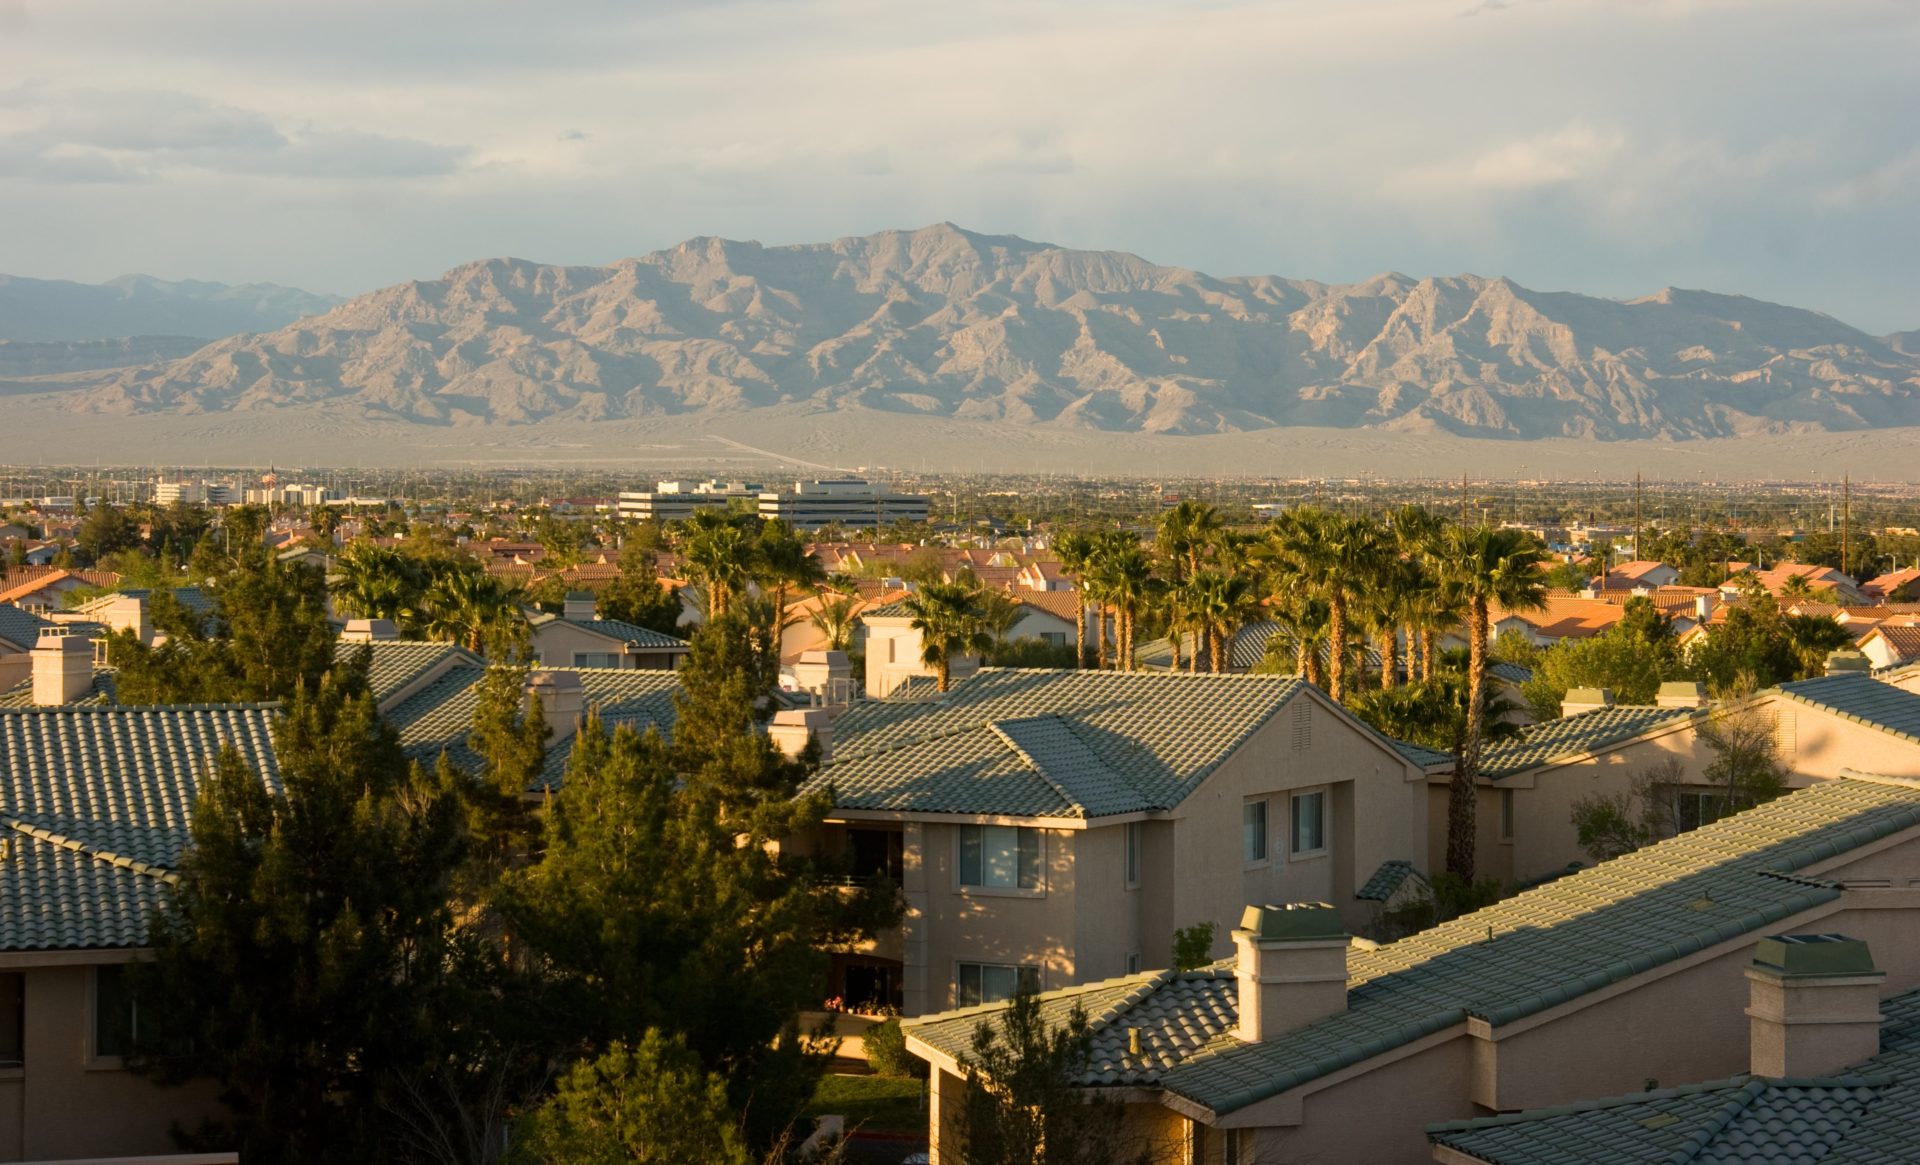 A rooftop view of a residential area, focusing on a group of condo buildings with gray tile roofs, with terra cotta-roofed buildings in the distance. The tops of palm trees are interspersed throughout the buildings. In the distance, there is a large brown mountain range